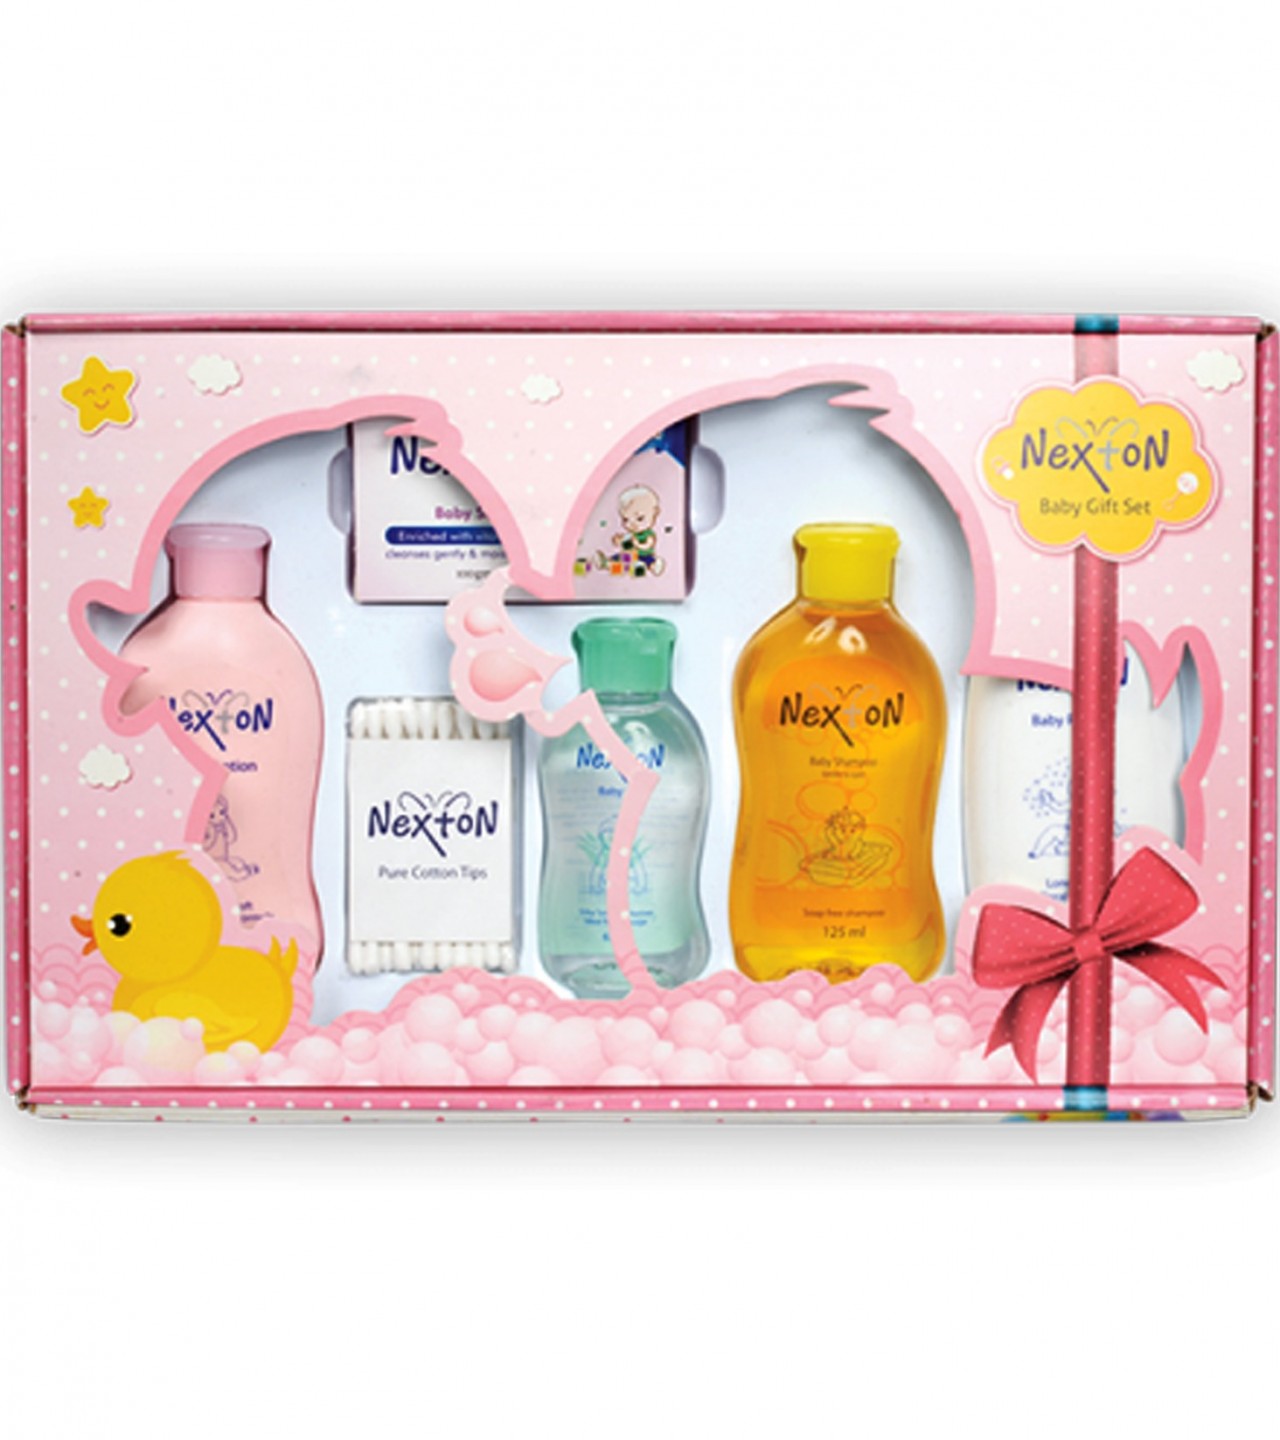 Nexton 6 in 1 Baby Gift Pack (NGS 92202)